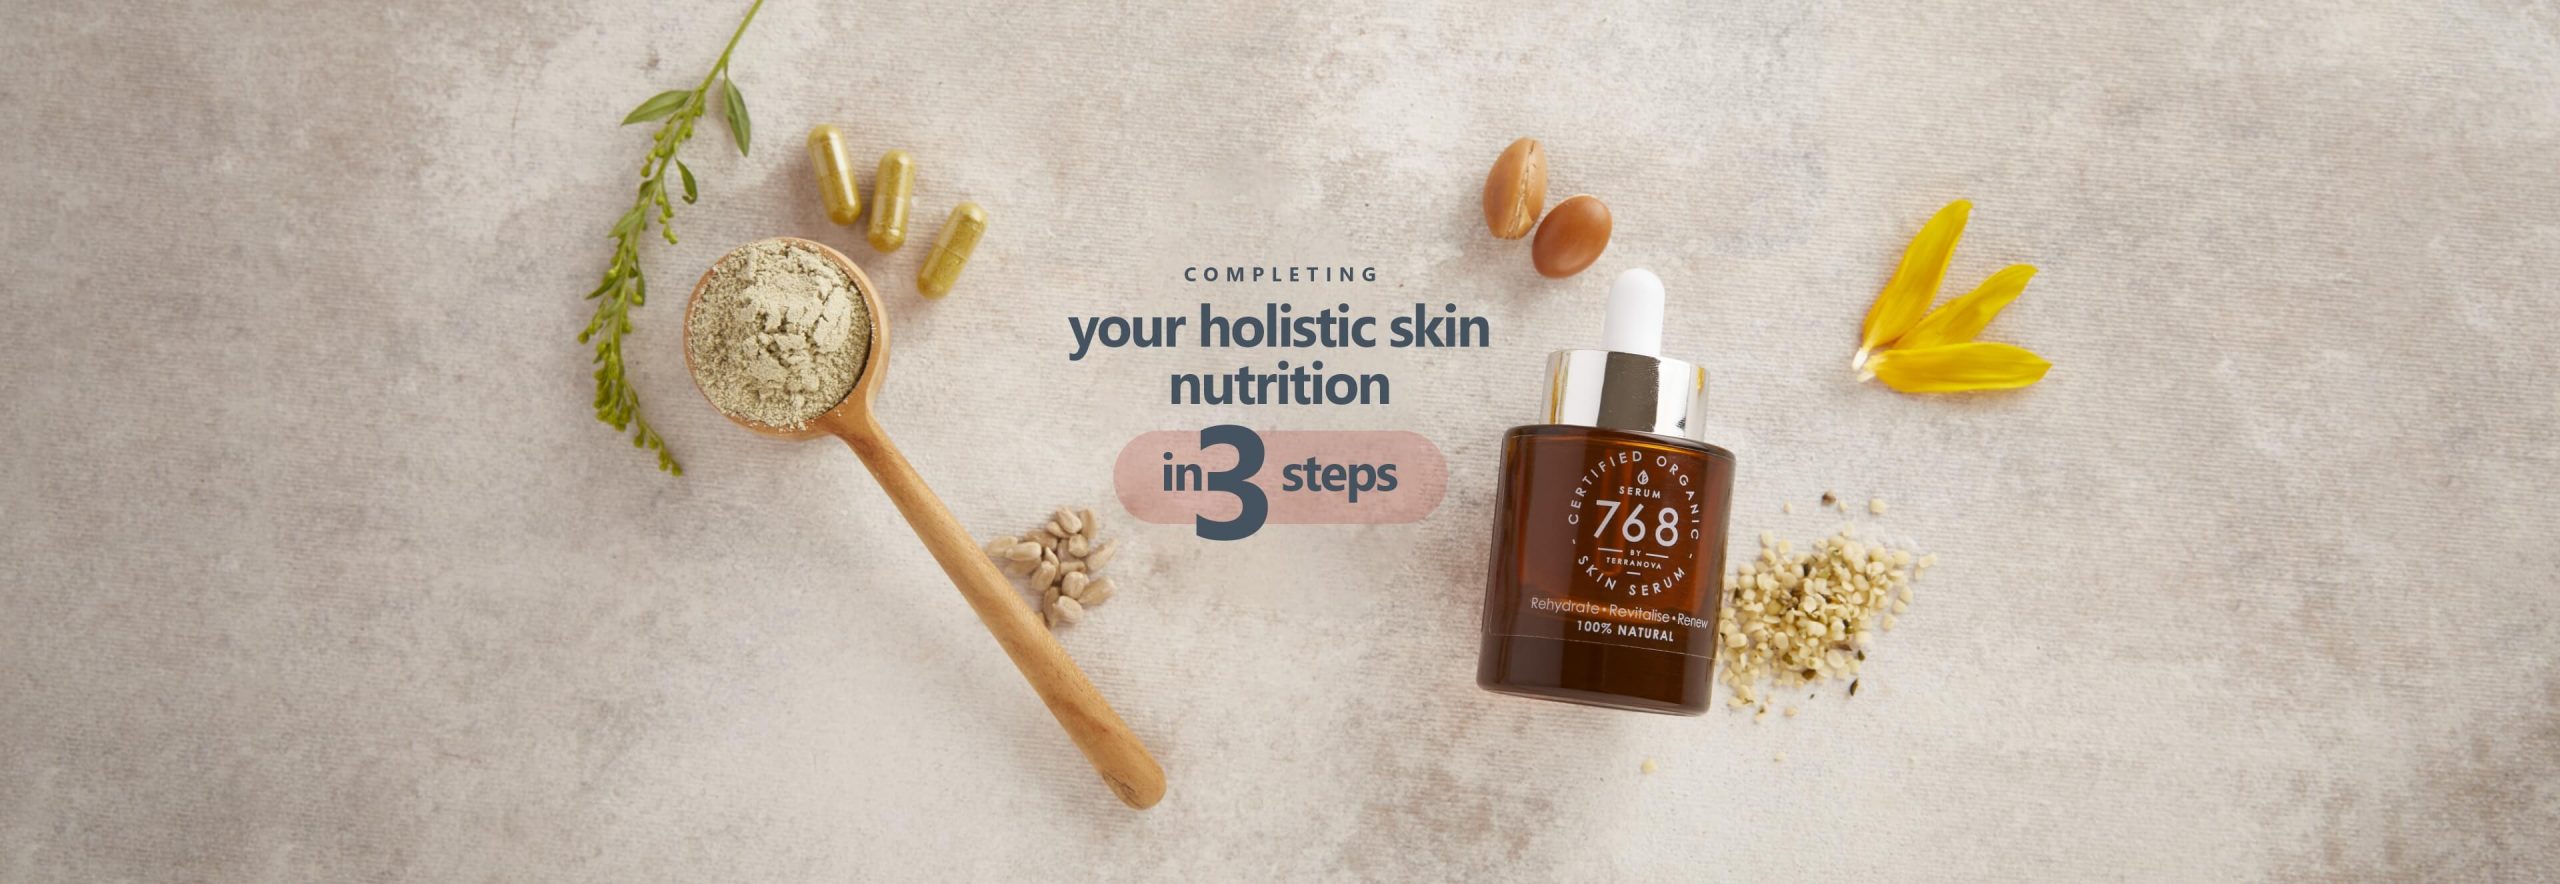 Completing your holistic skin nutrition in 3 steps